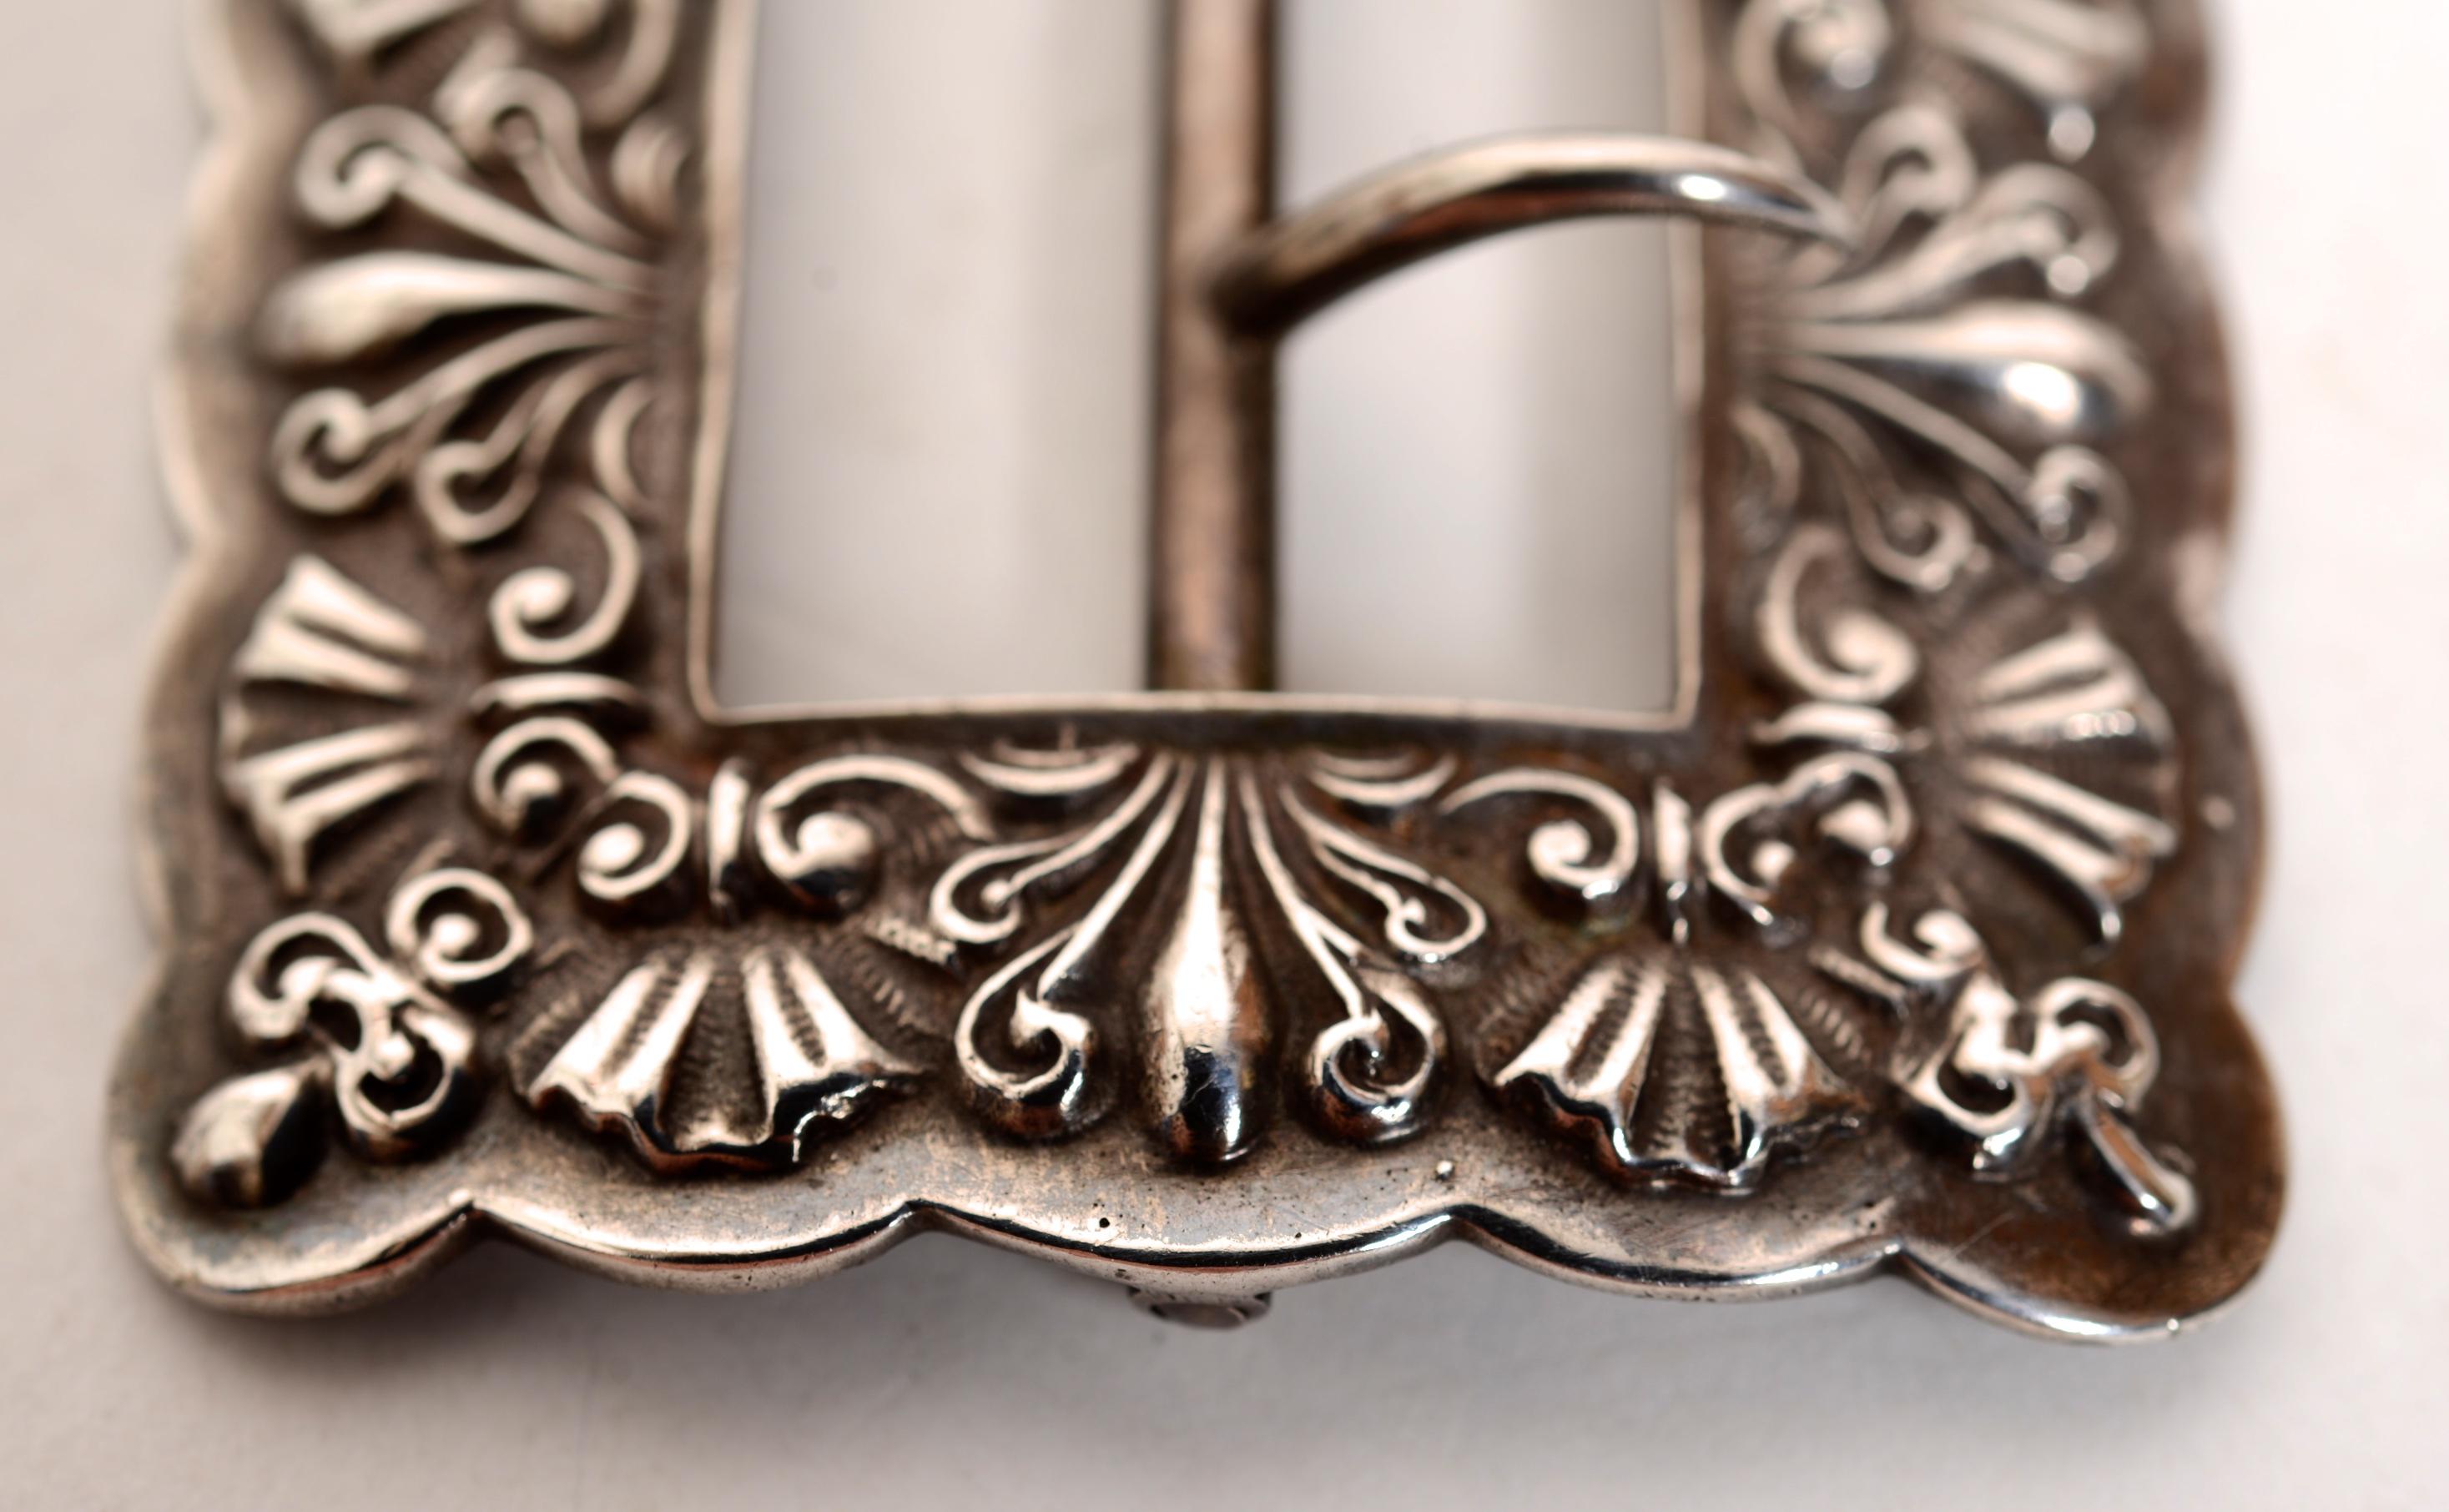 Gorham Sterling Silver Belt Buckle #144, c1888.  The design work of stylized flowers and shells is crisp and has a beautiful patina. The center section moves easily. There has been no repairs. 
These buckles are normally worn with a black Petersham